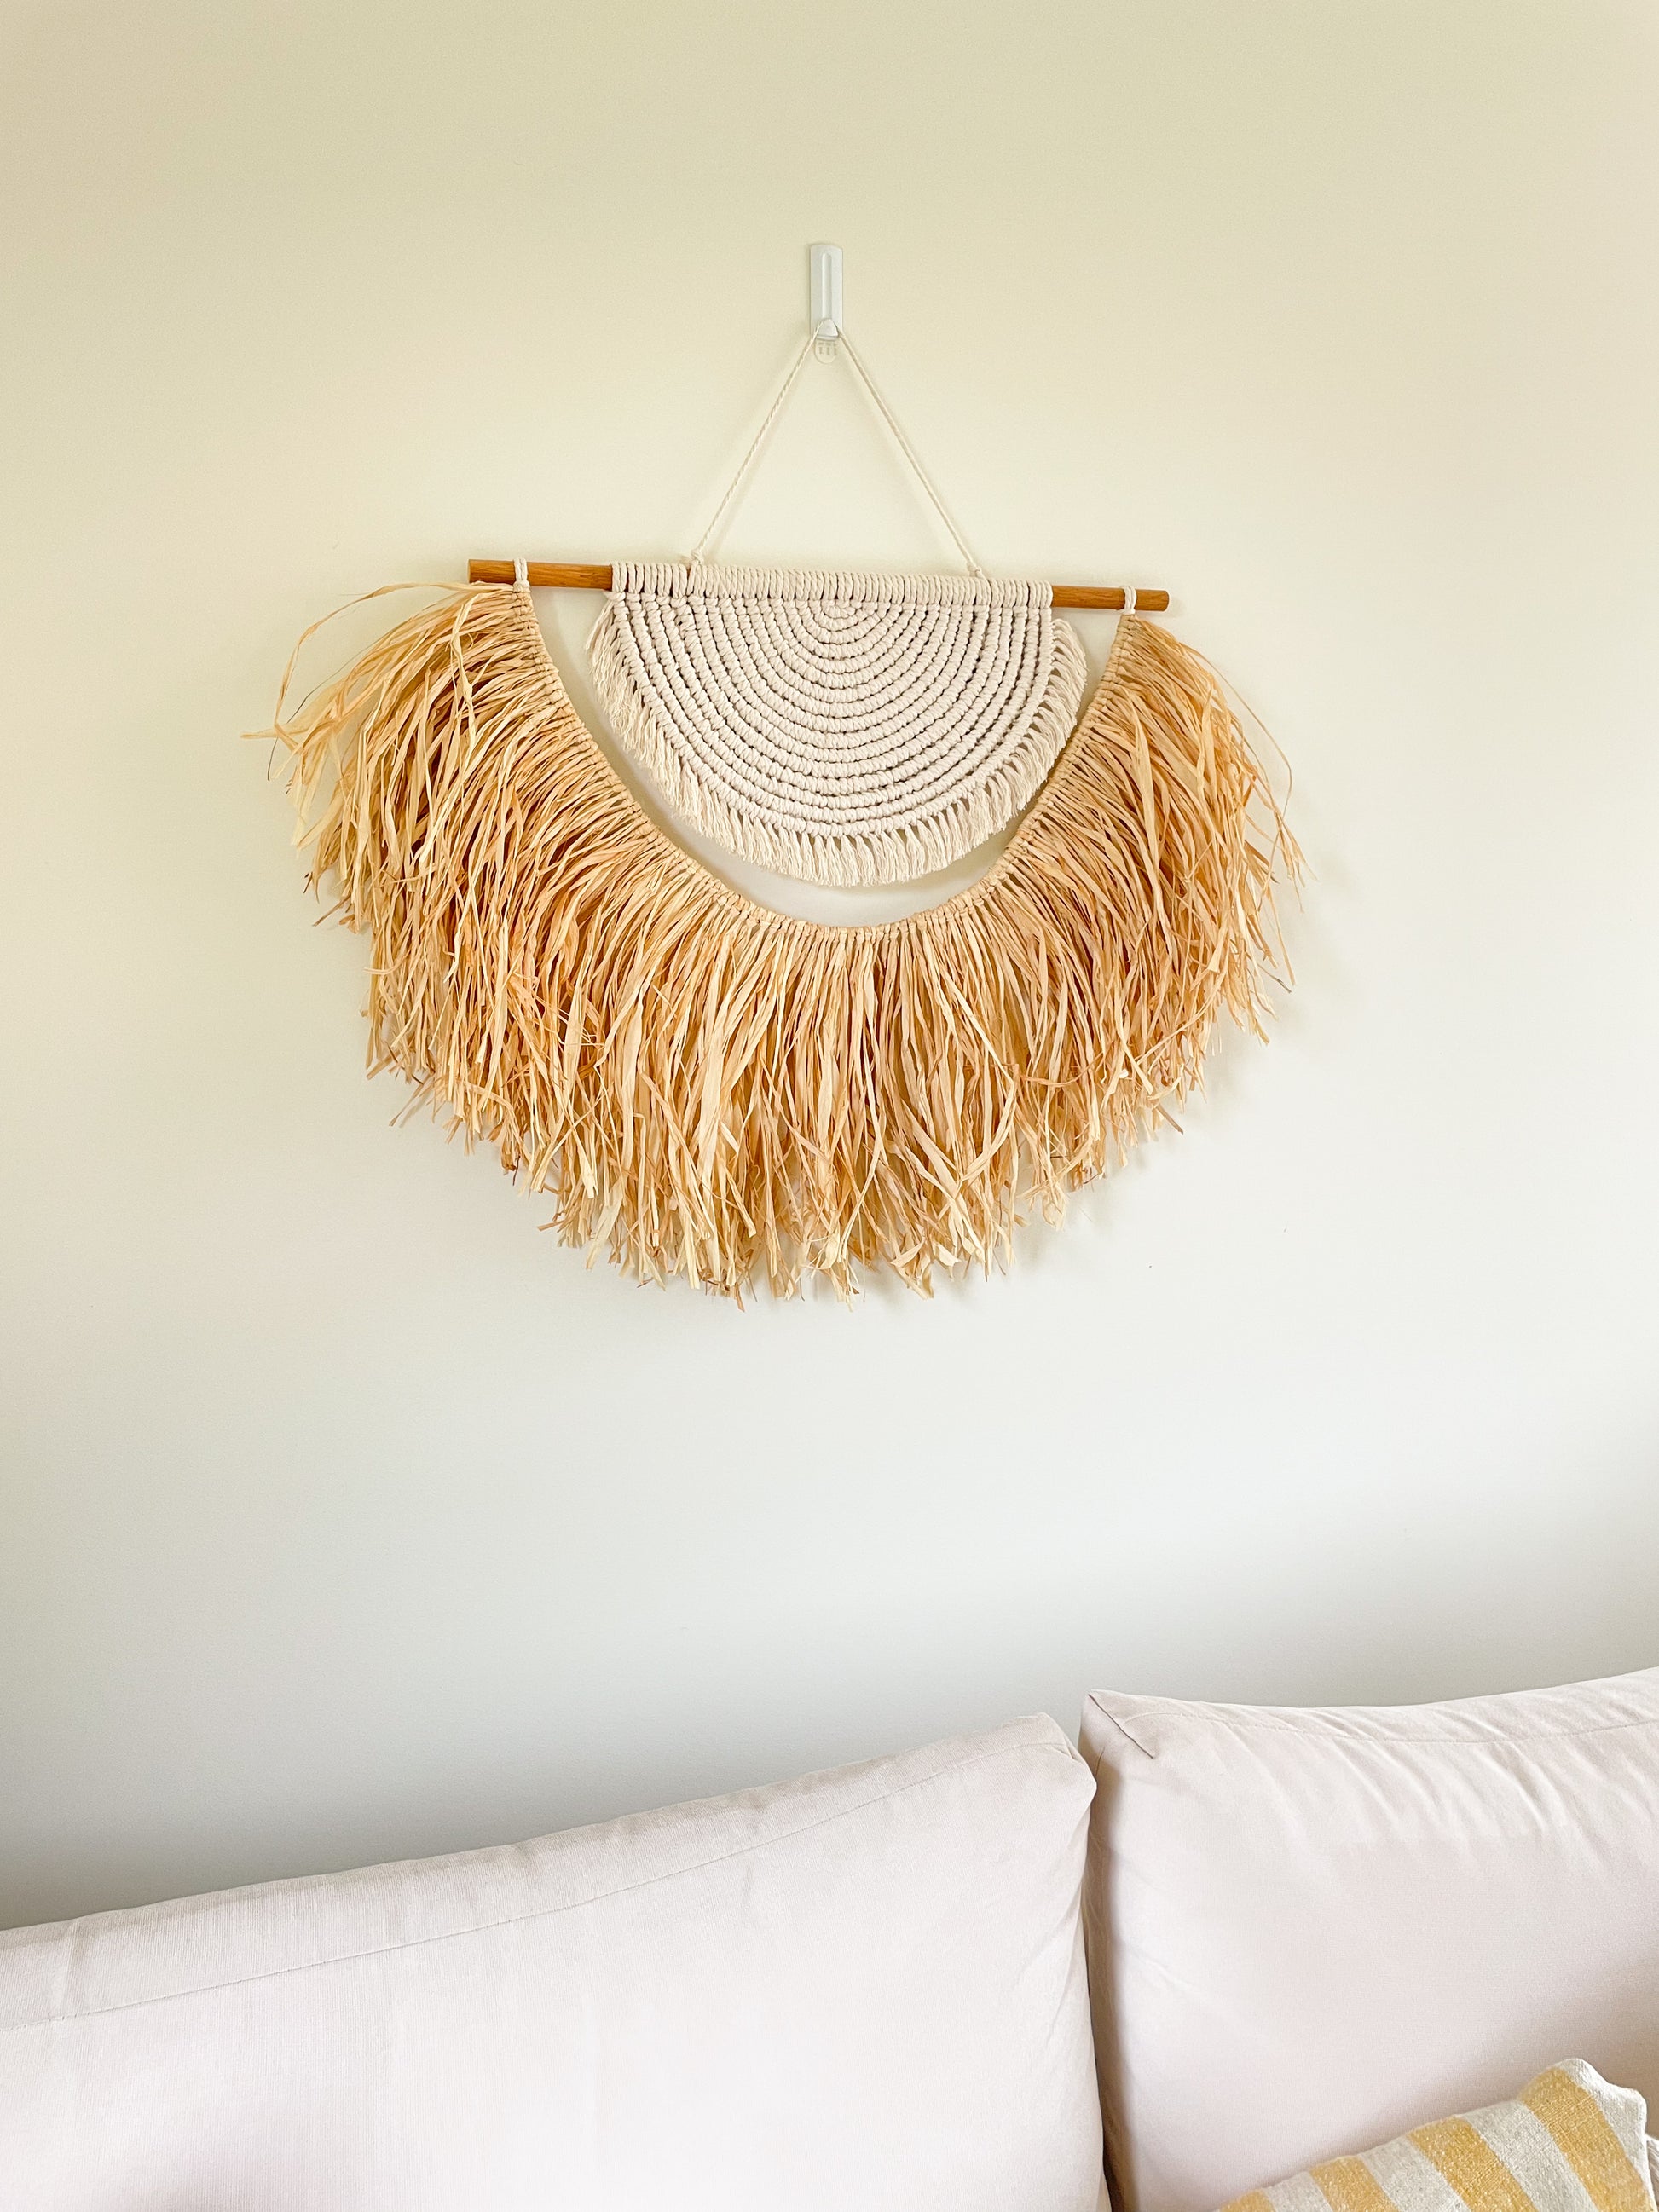 Large macrame and raffia wall hanging hanged on a wall above a large sofa